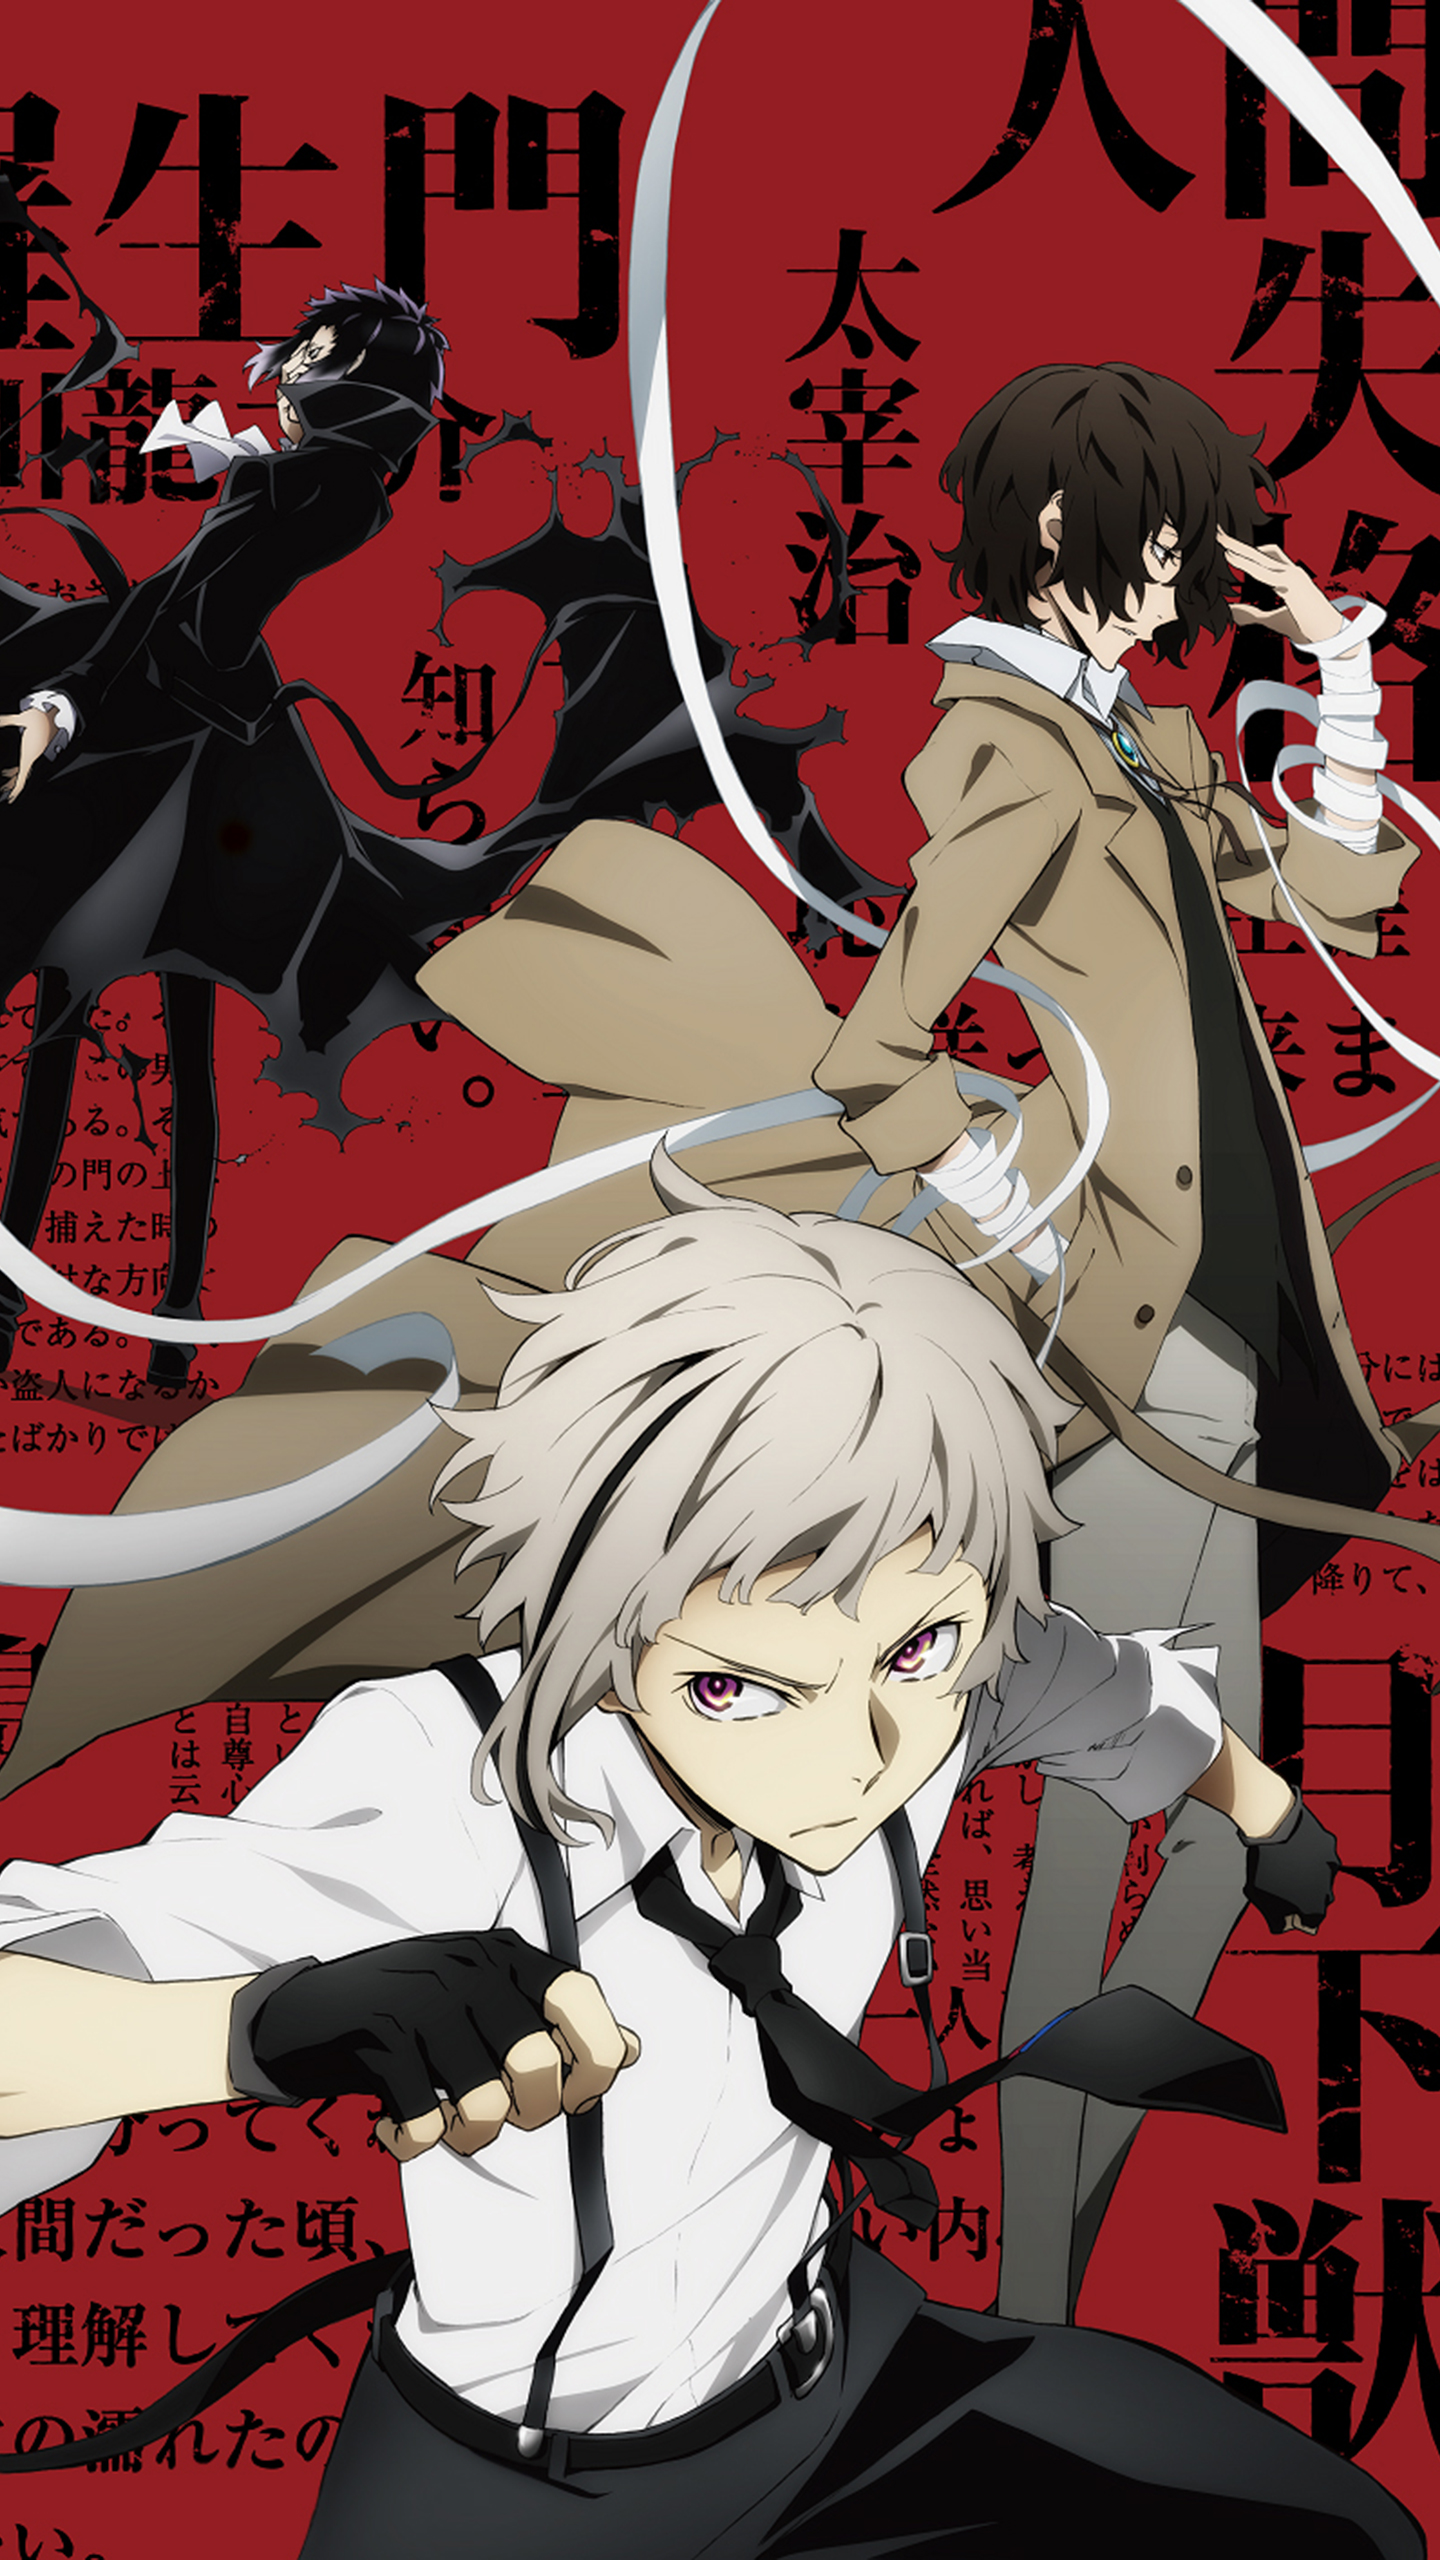 1 Comment - Bungou Stray Dogs 2 , HD Wallpaper & Backgrounds